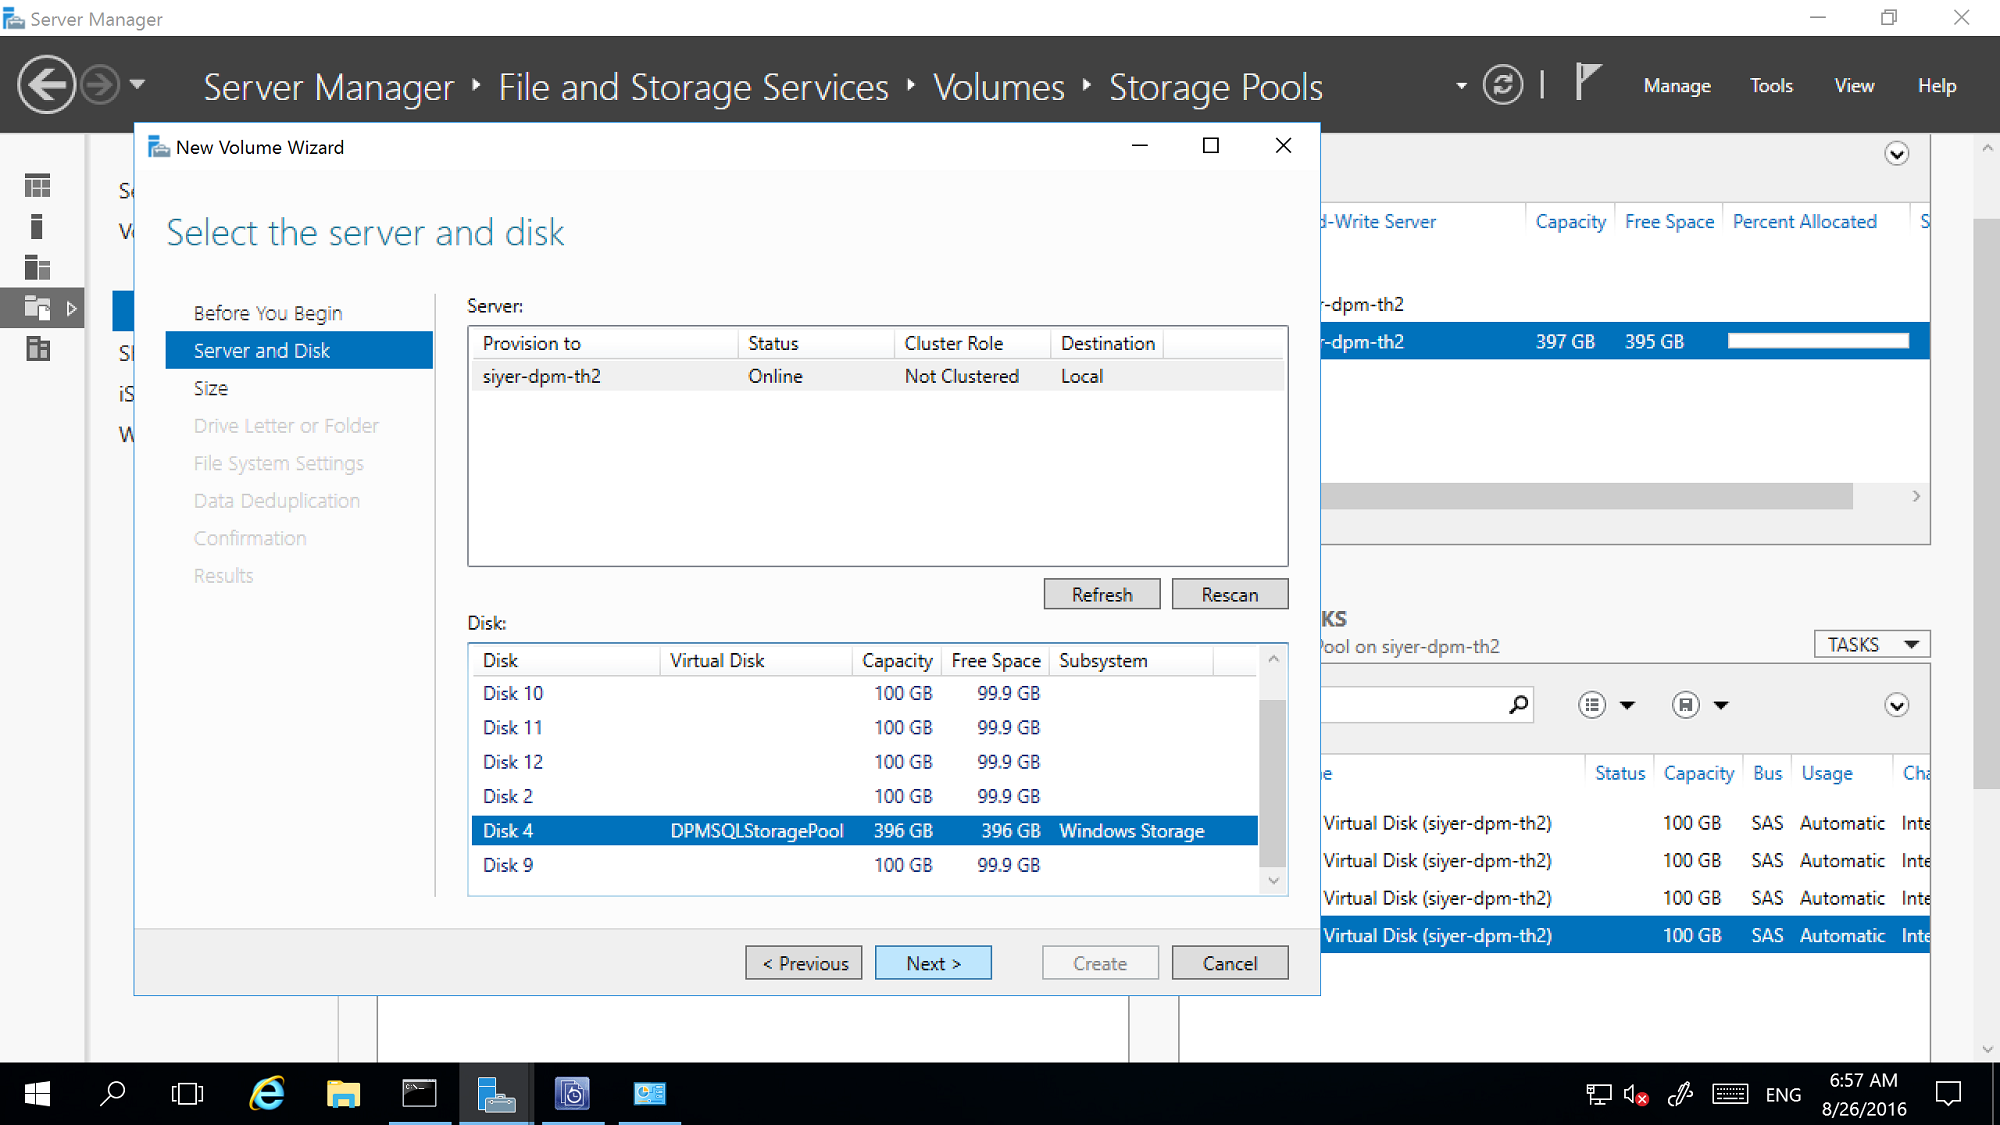 Select volume server and disk